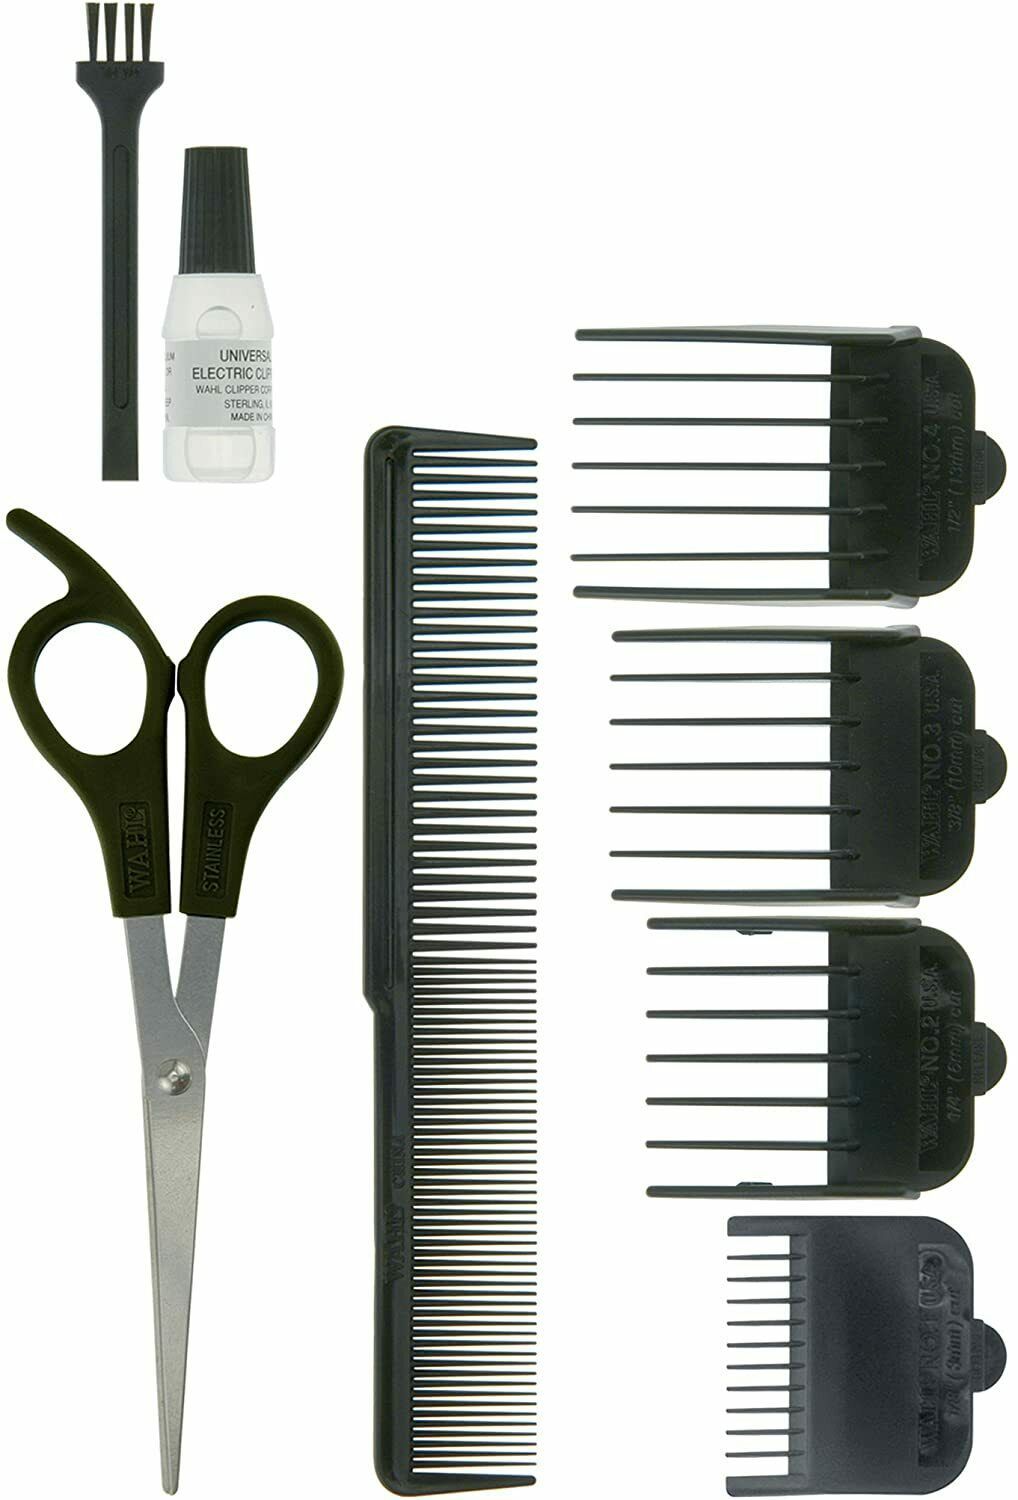 wahl 100 series hair clippers